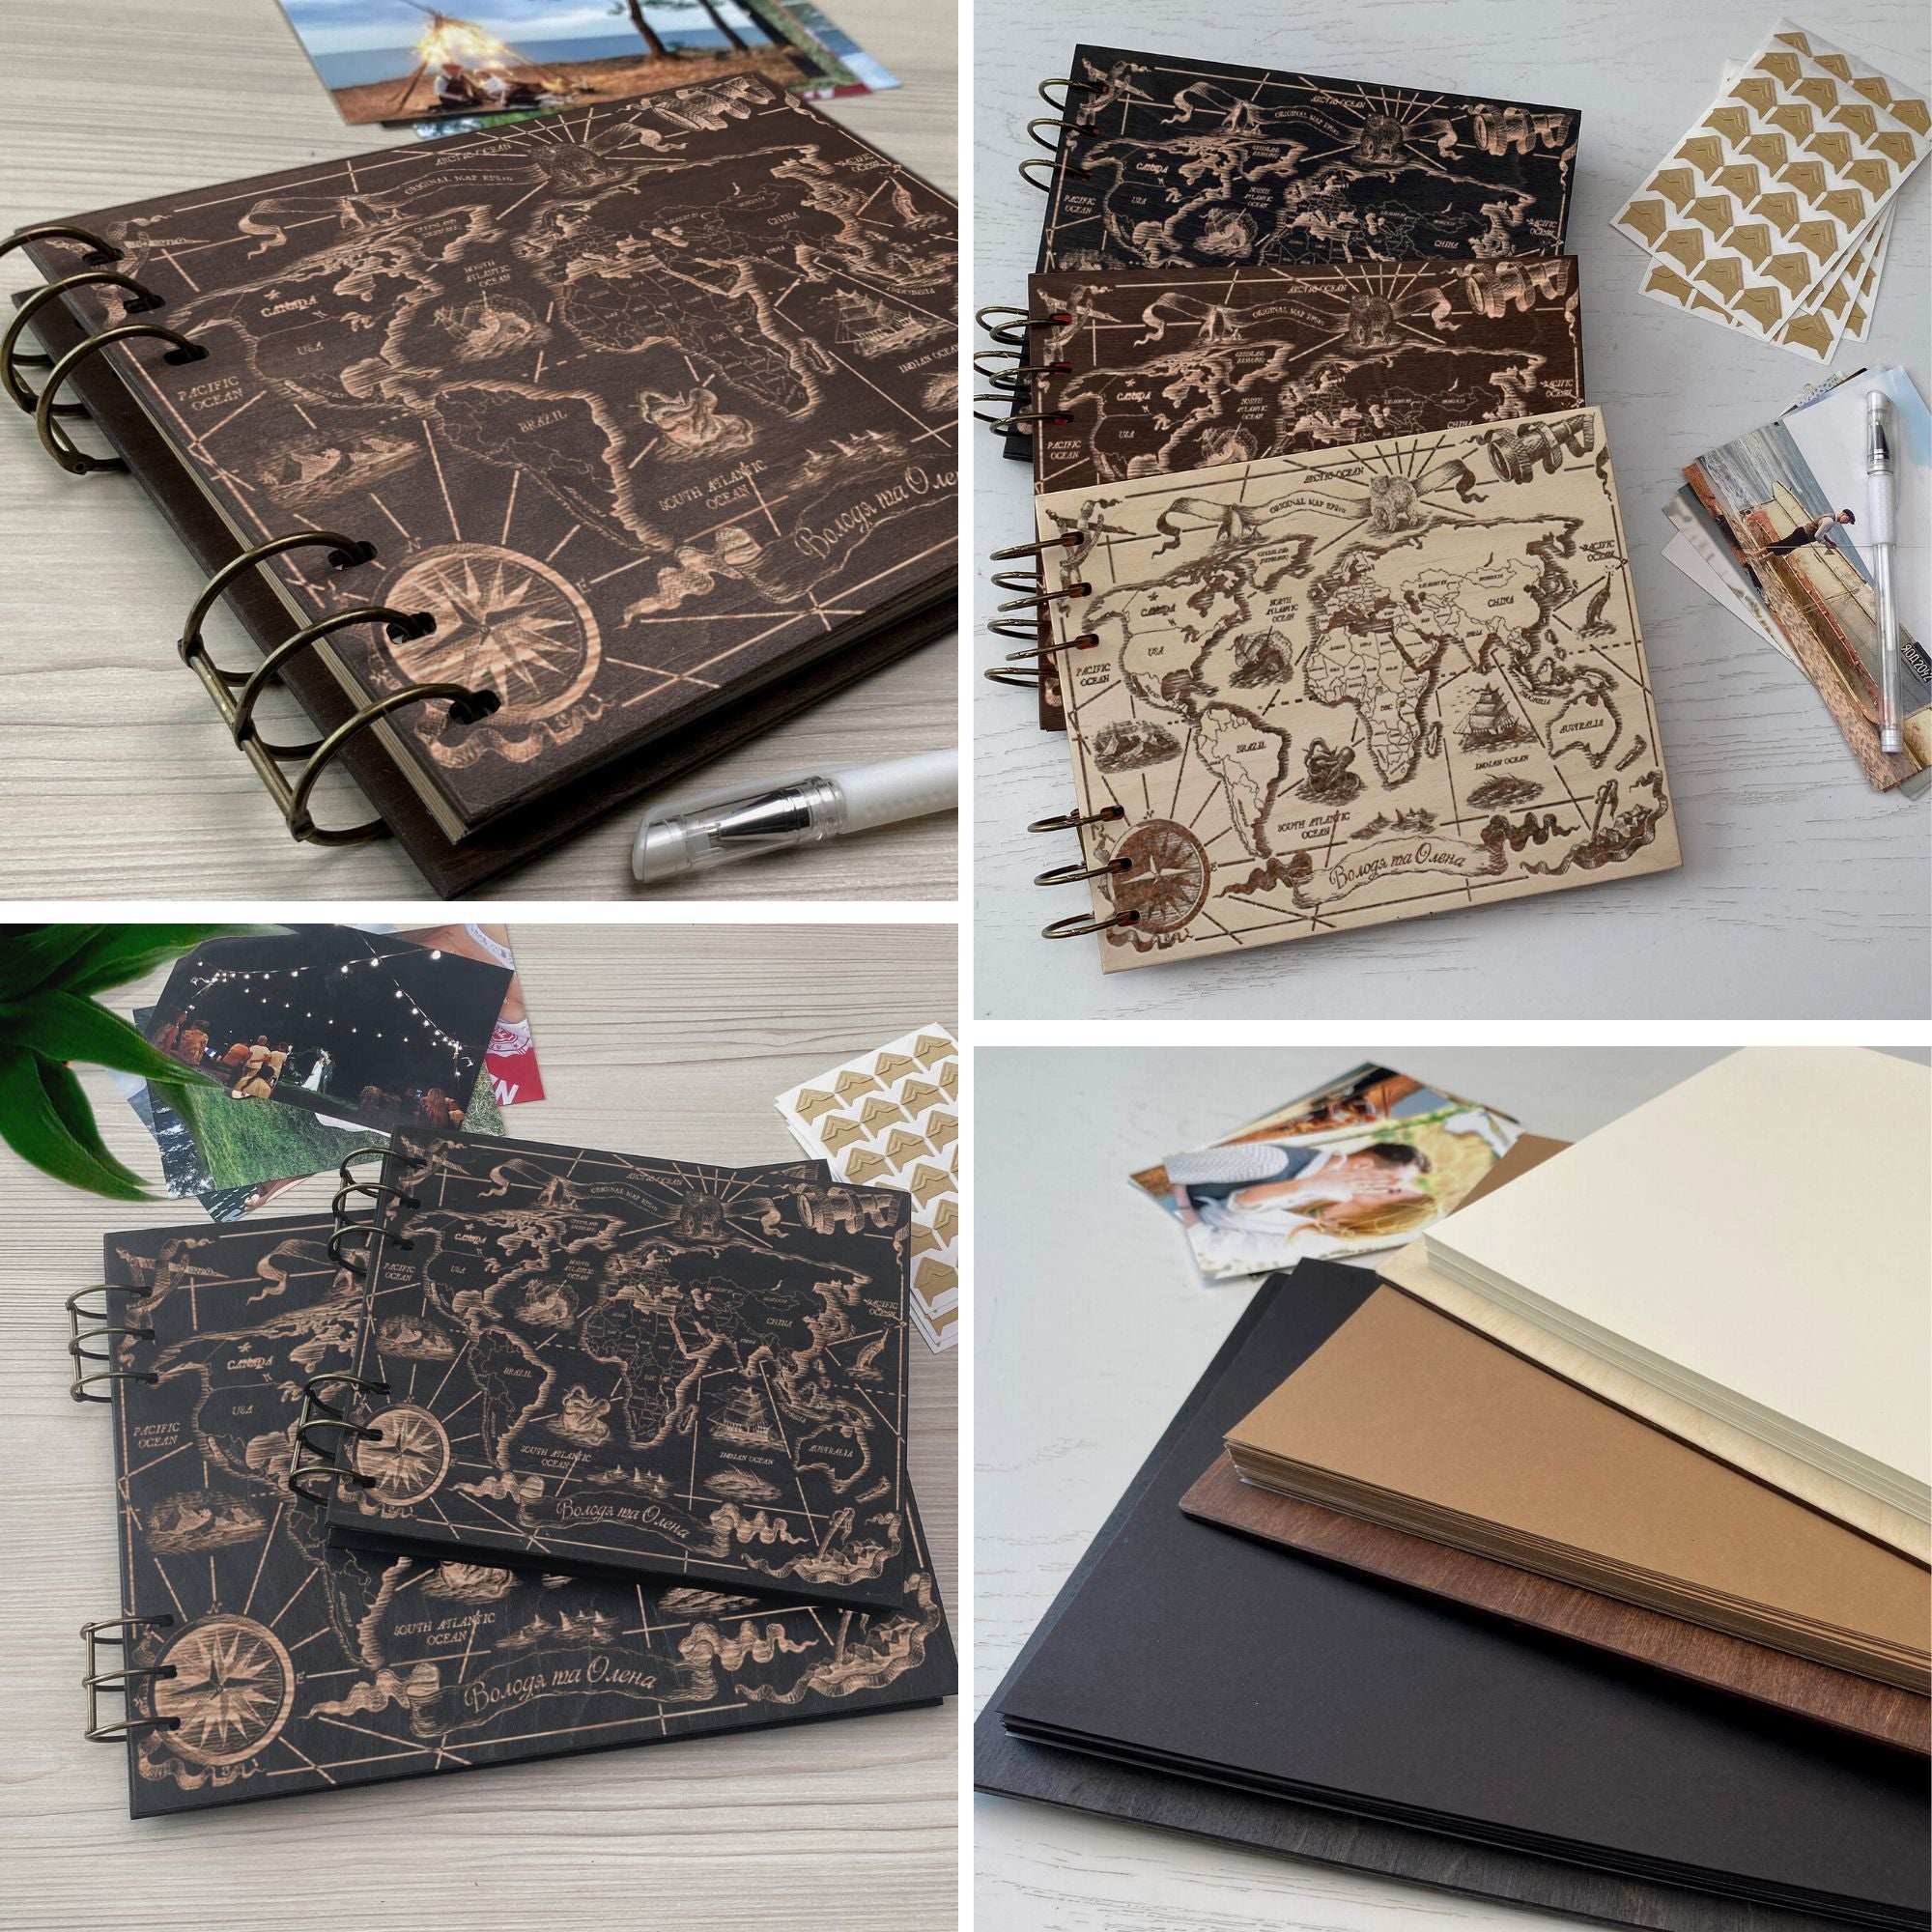 Personalized photo album cover and Earth engraving